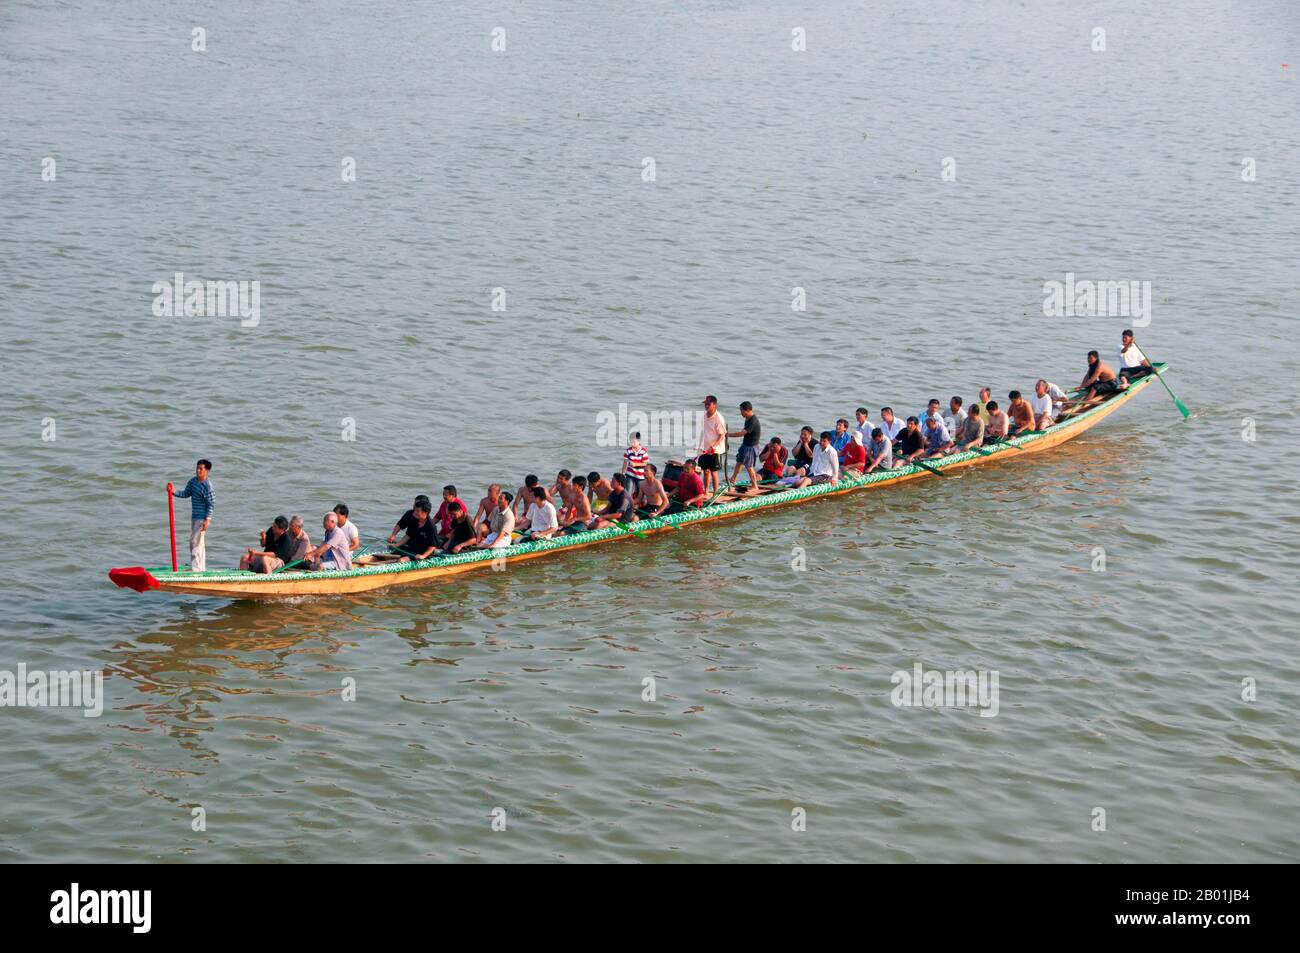 China: Dragon boat and its crew on the Li River, Guilin, Guangxi Province.  Guilin's Dragon Boat Festival is held on the fifth day of the fifth month (May) of the Chinese lunar calendar every 3 years. The festival was originally held in memory of the great Chinese poet, Quyuan.  The name Guilin means ‘Cassia Woods’ and is named after the osmanthus (cassia) blossoms that bloom throughout the autumn period.  Guilin is the scene of China’s most famous landscapes, inspiring thousands of paintings over many centuries. Stock Photo